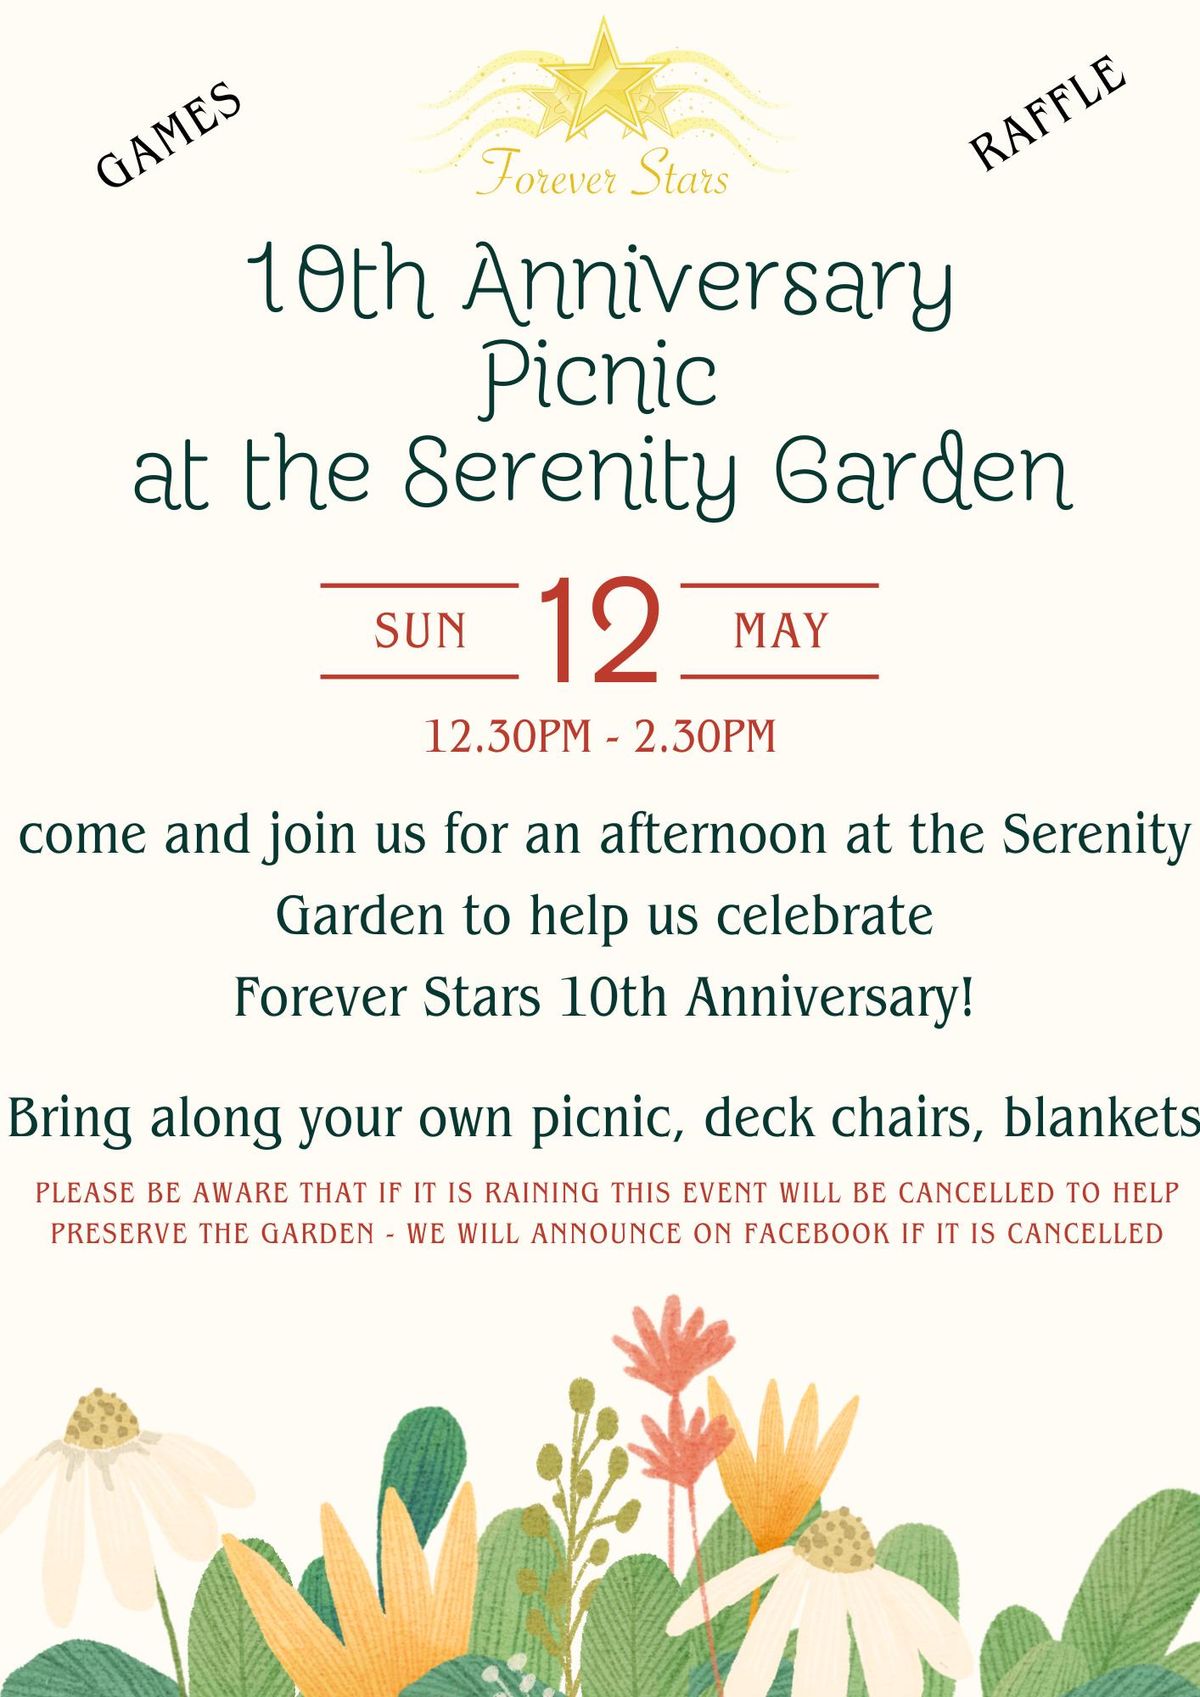 Forever Stars 10th Anniversary Picnic at the Serenity Garden